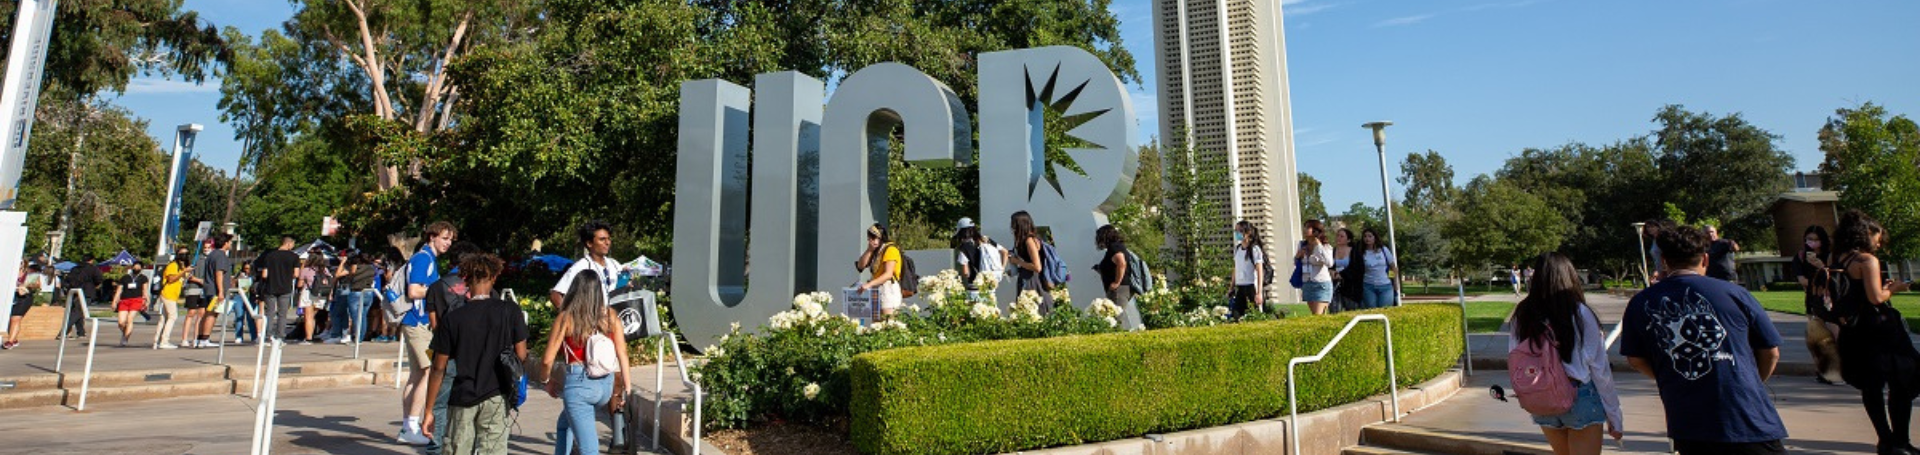 Students walking past UCR sign and bell tower